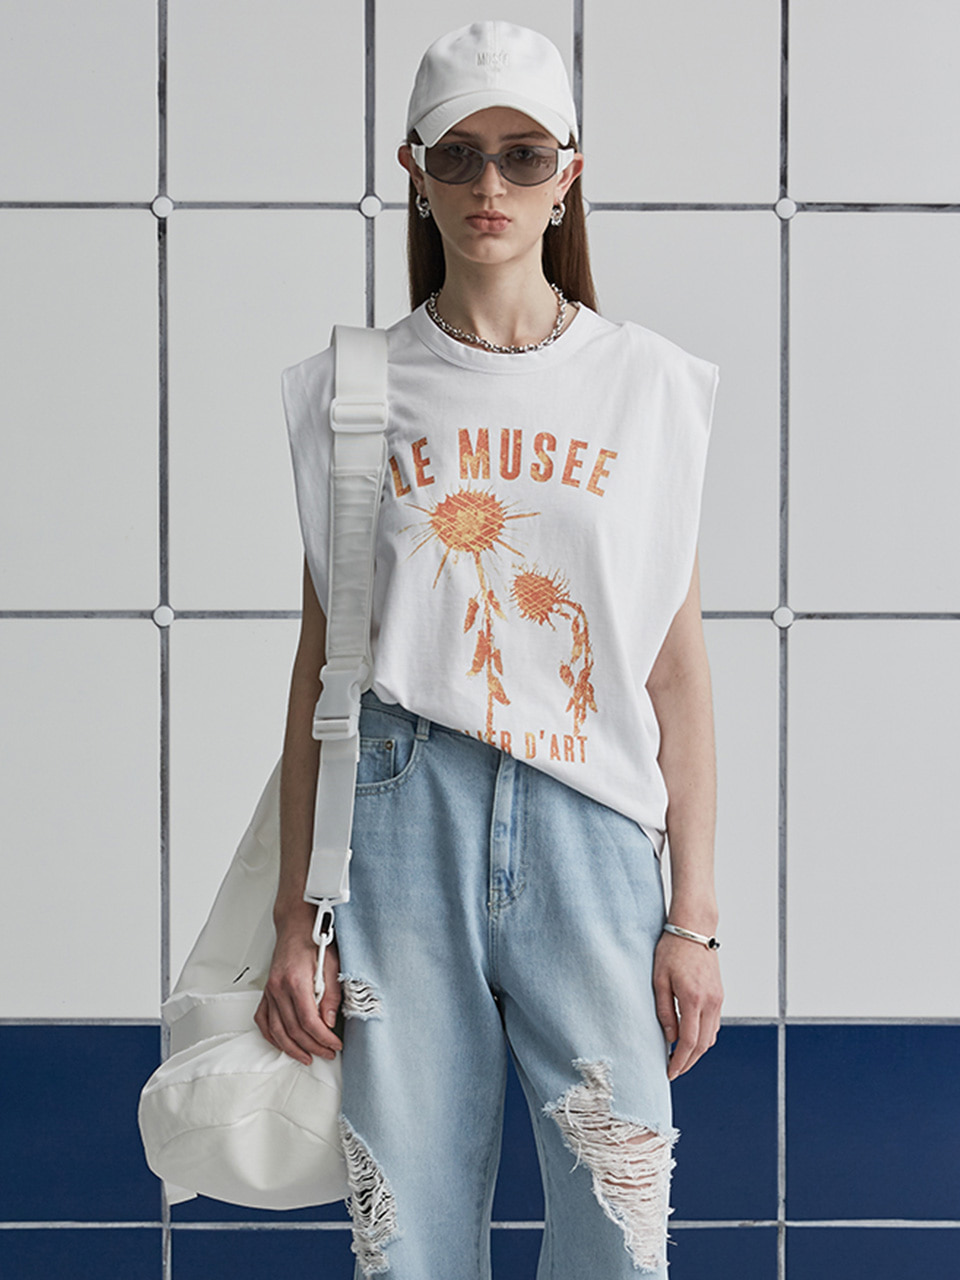 FIORE Sleeveless LE MUSEE  Print T-shirt_White